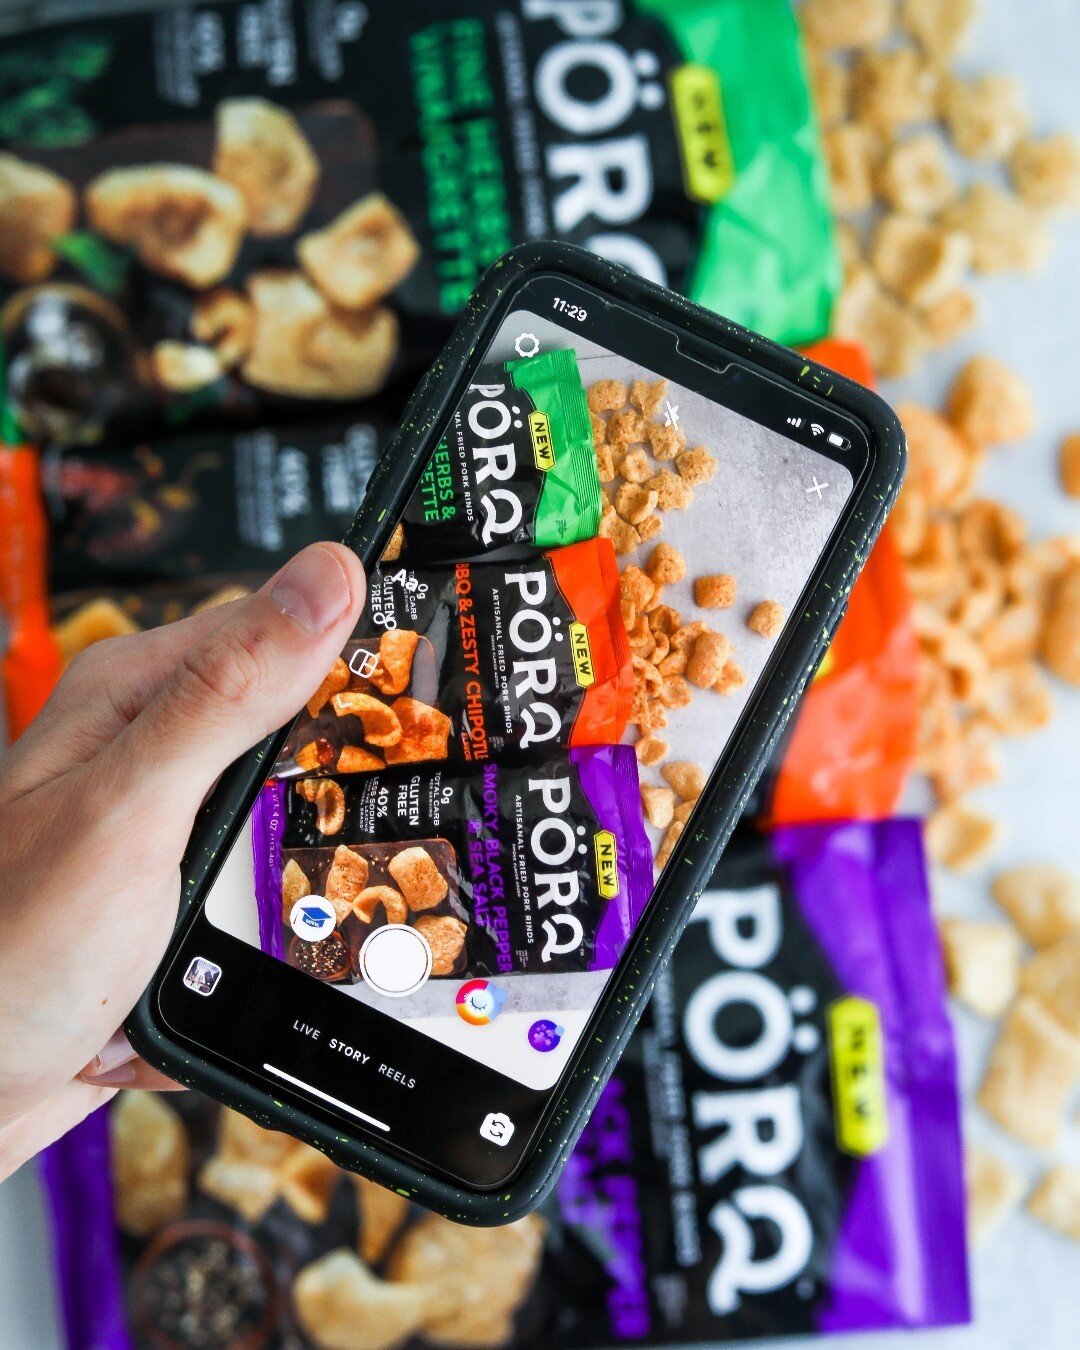 You know the drill - phone eats first 🤳
If you like showing off your favorite snack like us, be sure to tag us in your photos and stories. We just might feature you on our page! 😉 #PORQSnacks